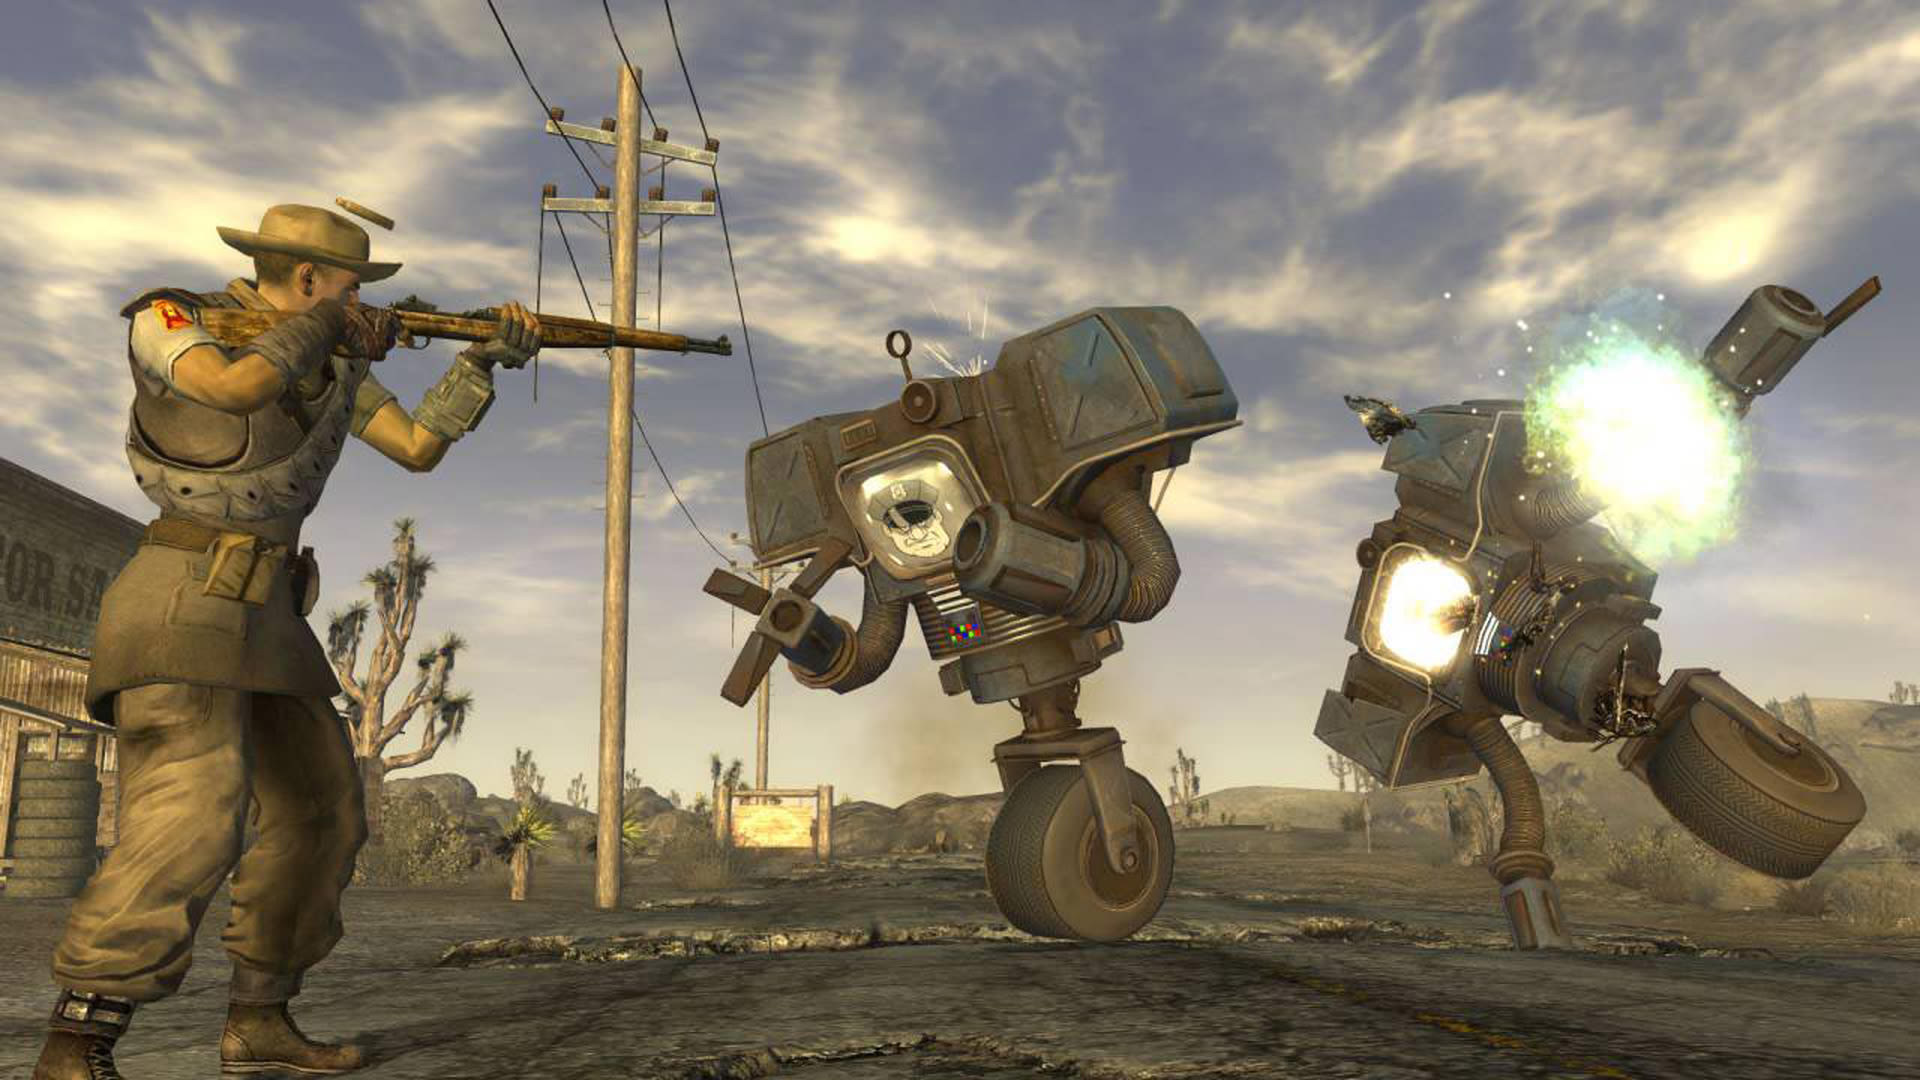 Fallout's TV show renaissance inspires New Vegas fans to celebrate the RPG's… interesting dialogue